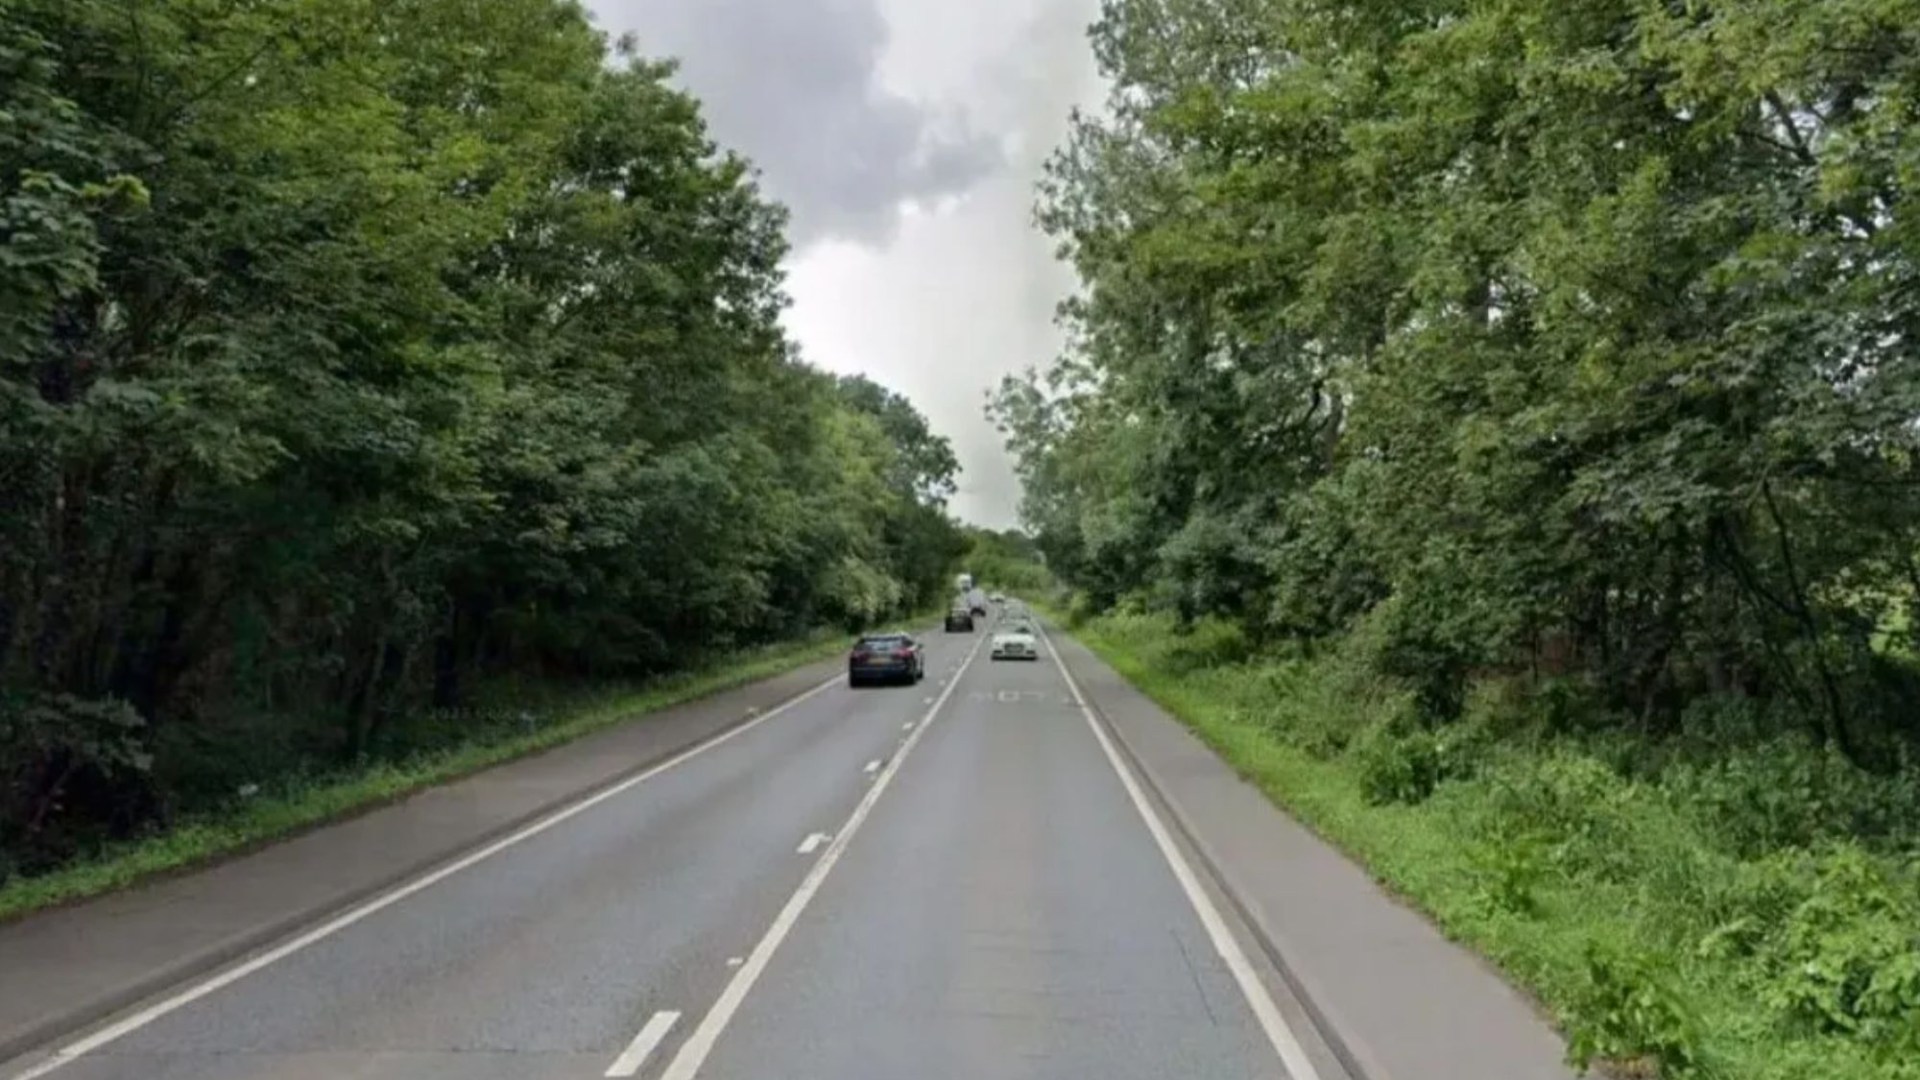 Girl, 4, and boy, 9, among 3 killed after car crashes with lorry on A5 in Hinckley